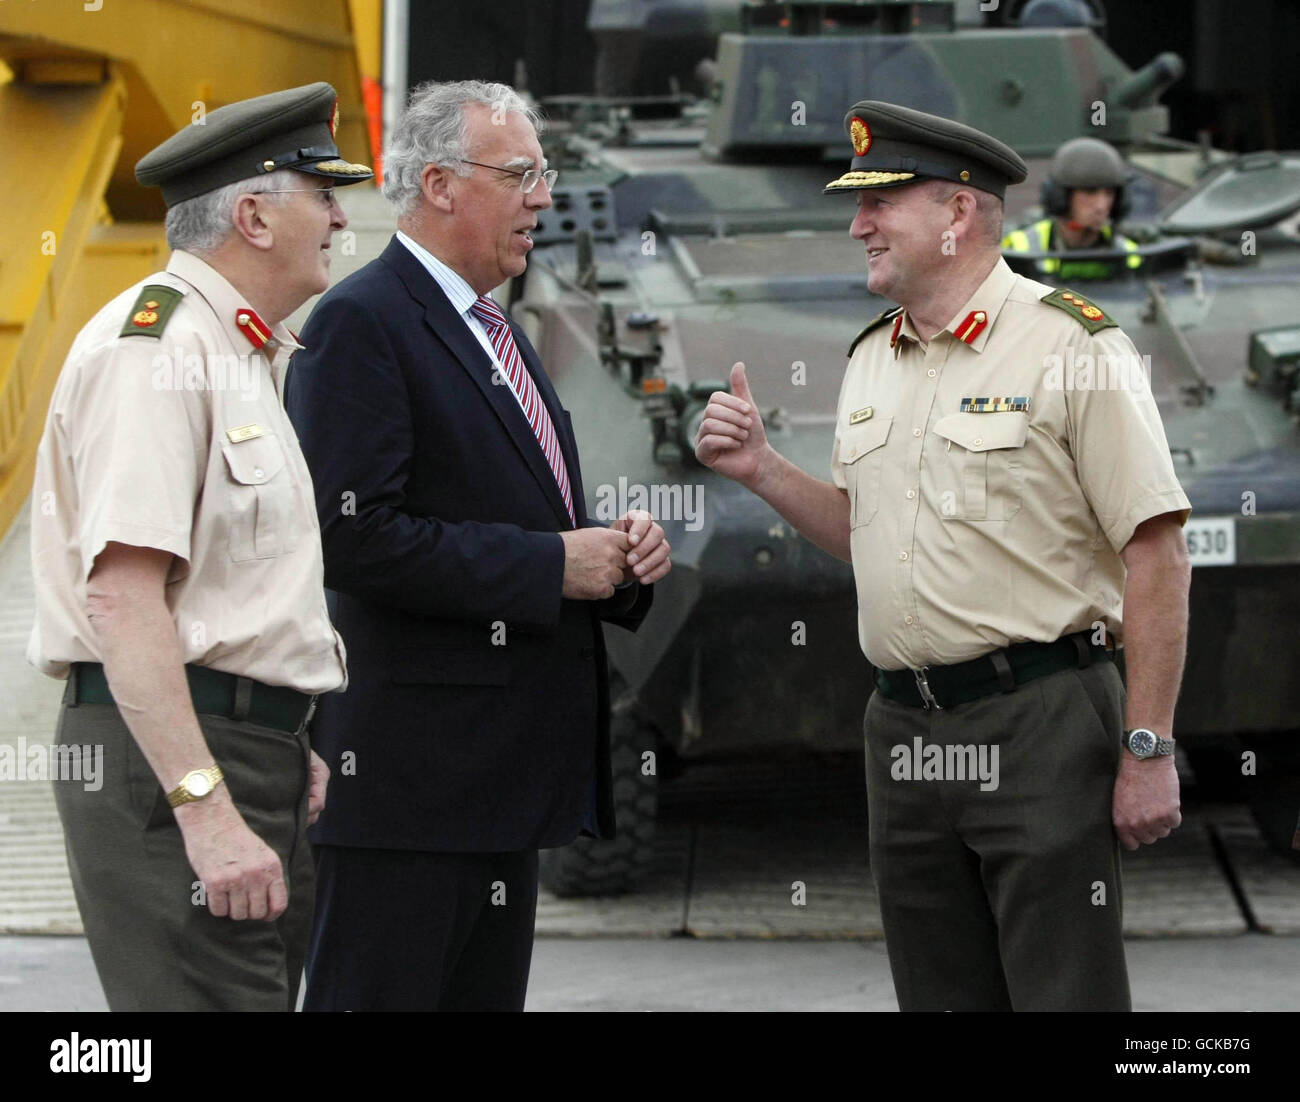 (from left) Assistant Chief of Staff Dave Ash, Defence Minister Tony Killeen and Defence Forces Chief of Staff Lieutenant General Sean McCann oversee MOWAG Armoured Personnel Carriers being unloaded from the MV Grande Senegal, into Dublin Port as the Defence Forces equipment is returned from their recent UN Mission in Chad. Stock Photo